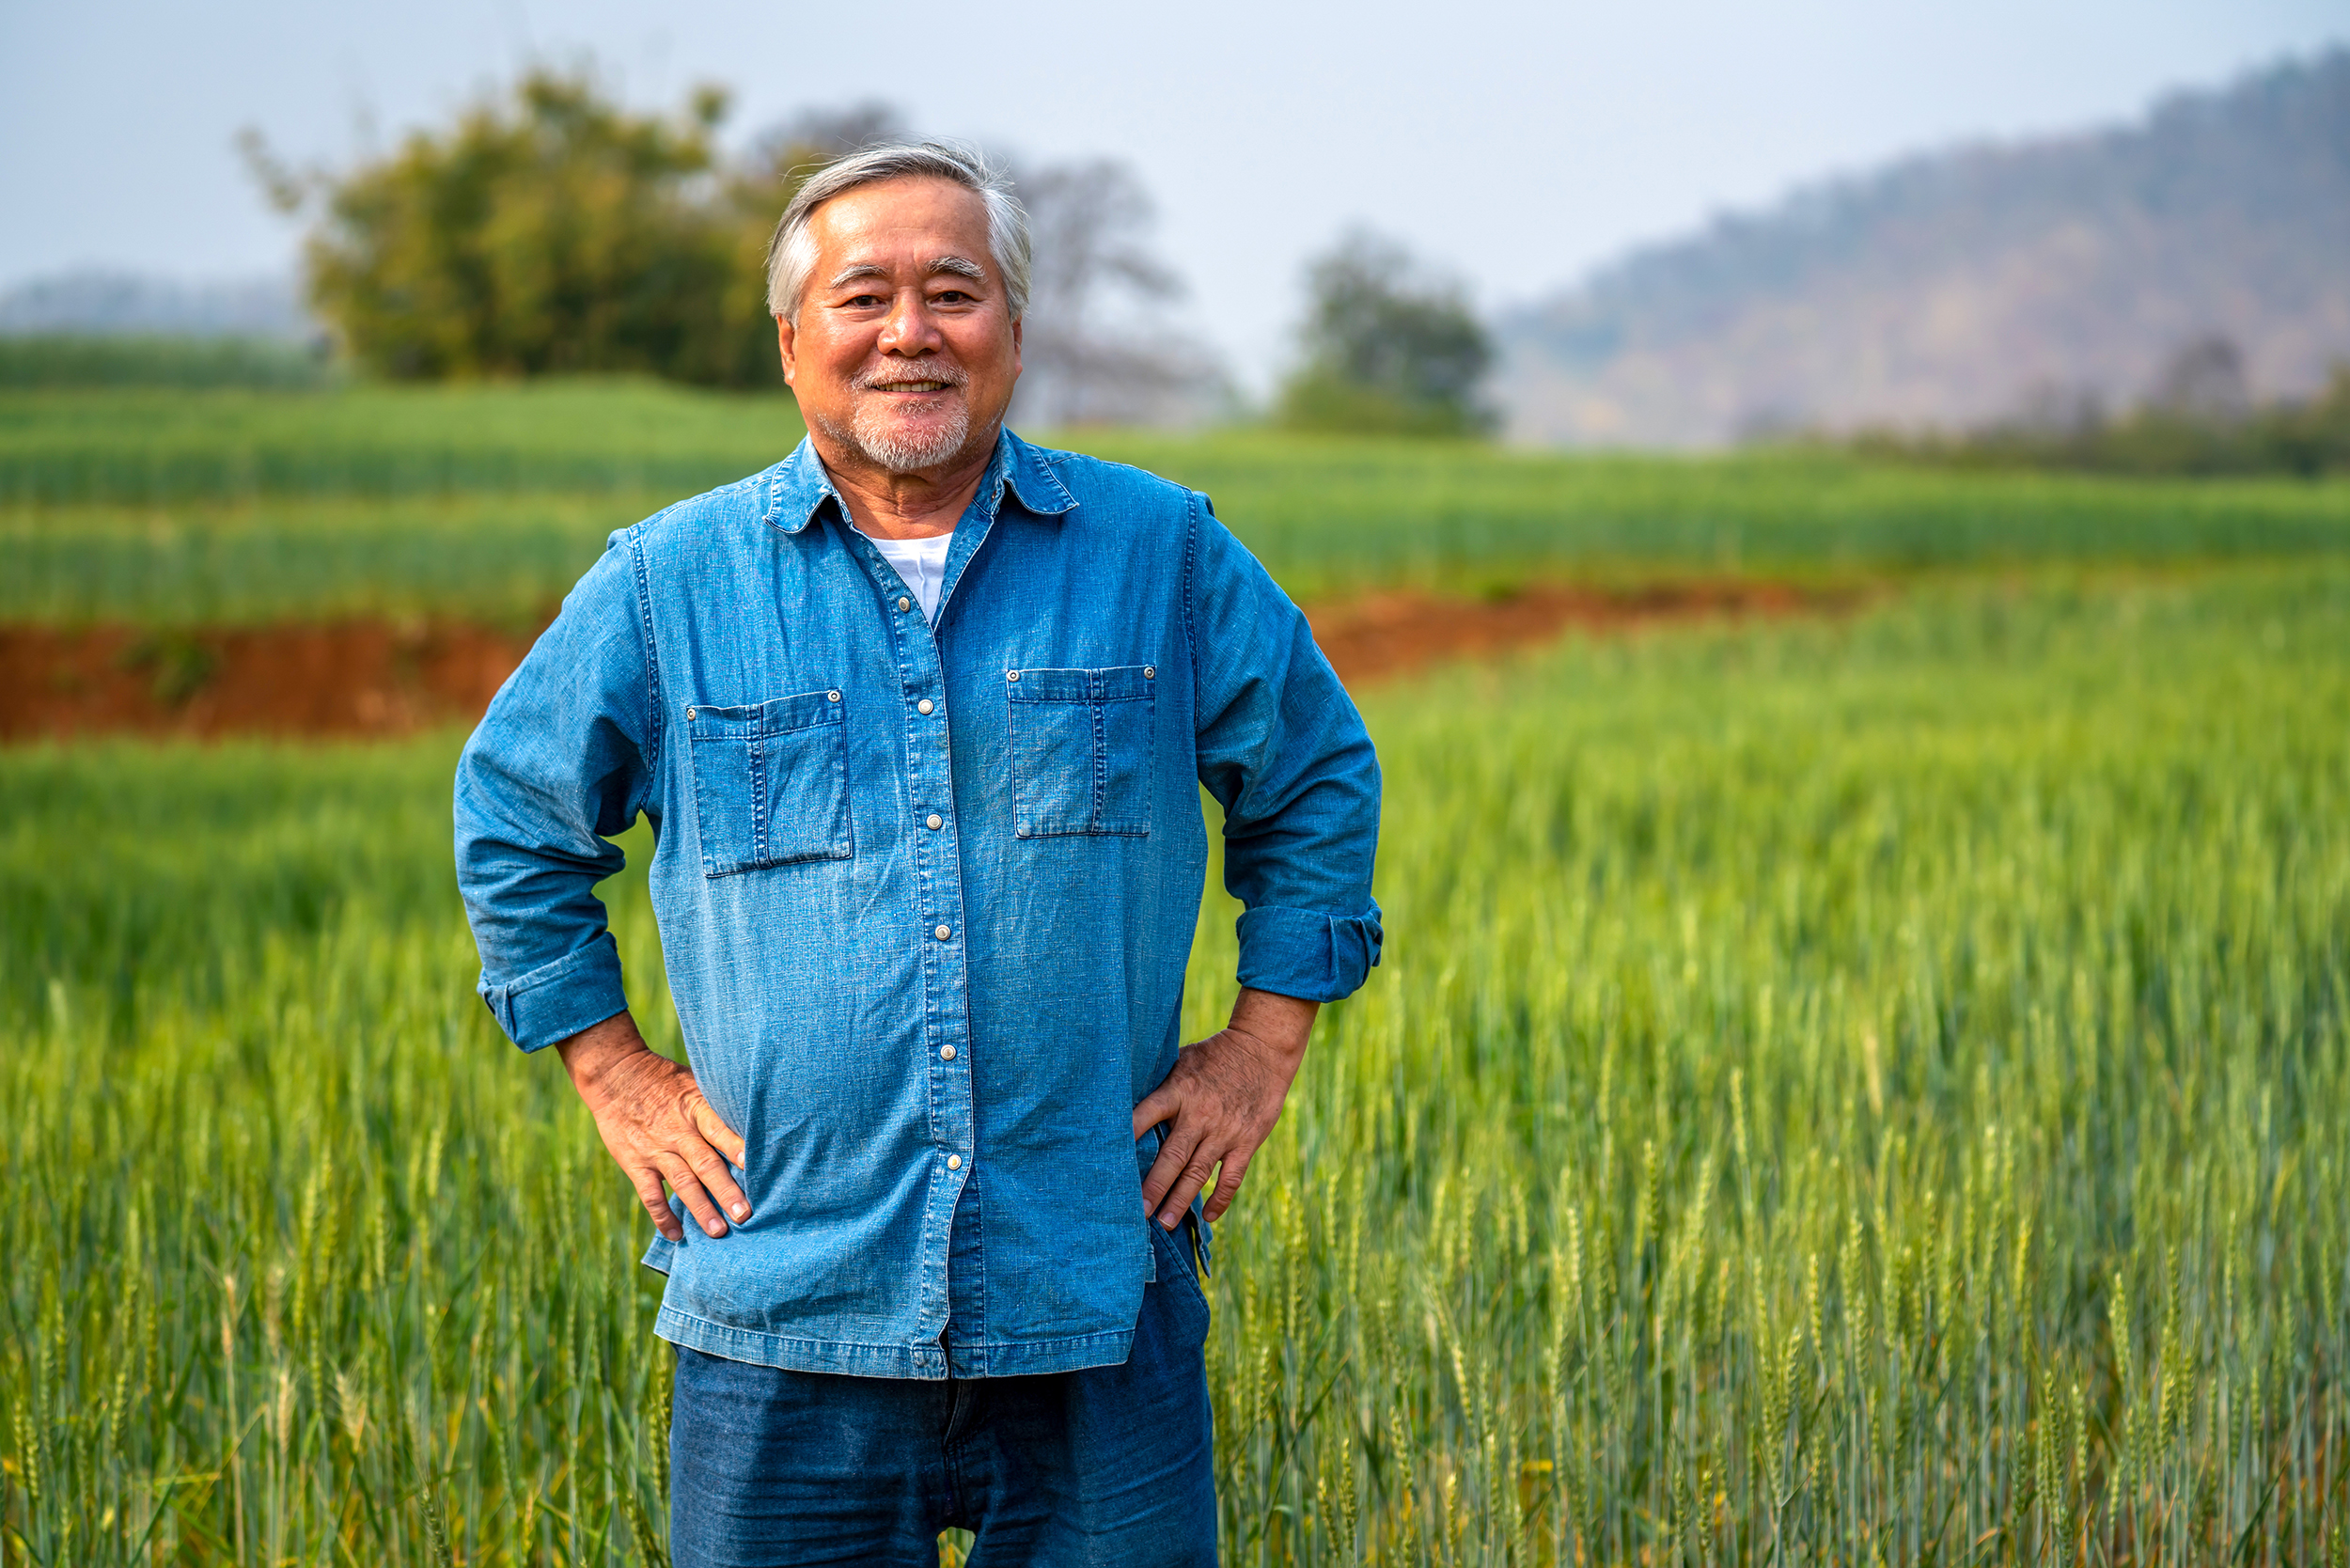 Smiling male agricultural worker standing in a wheat field